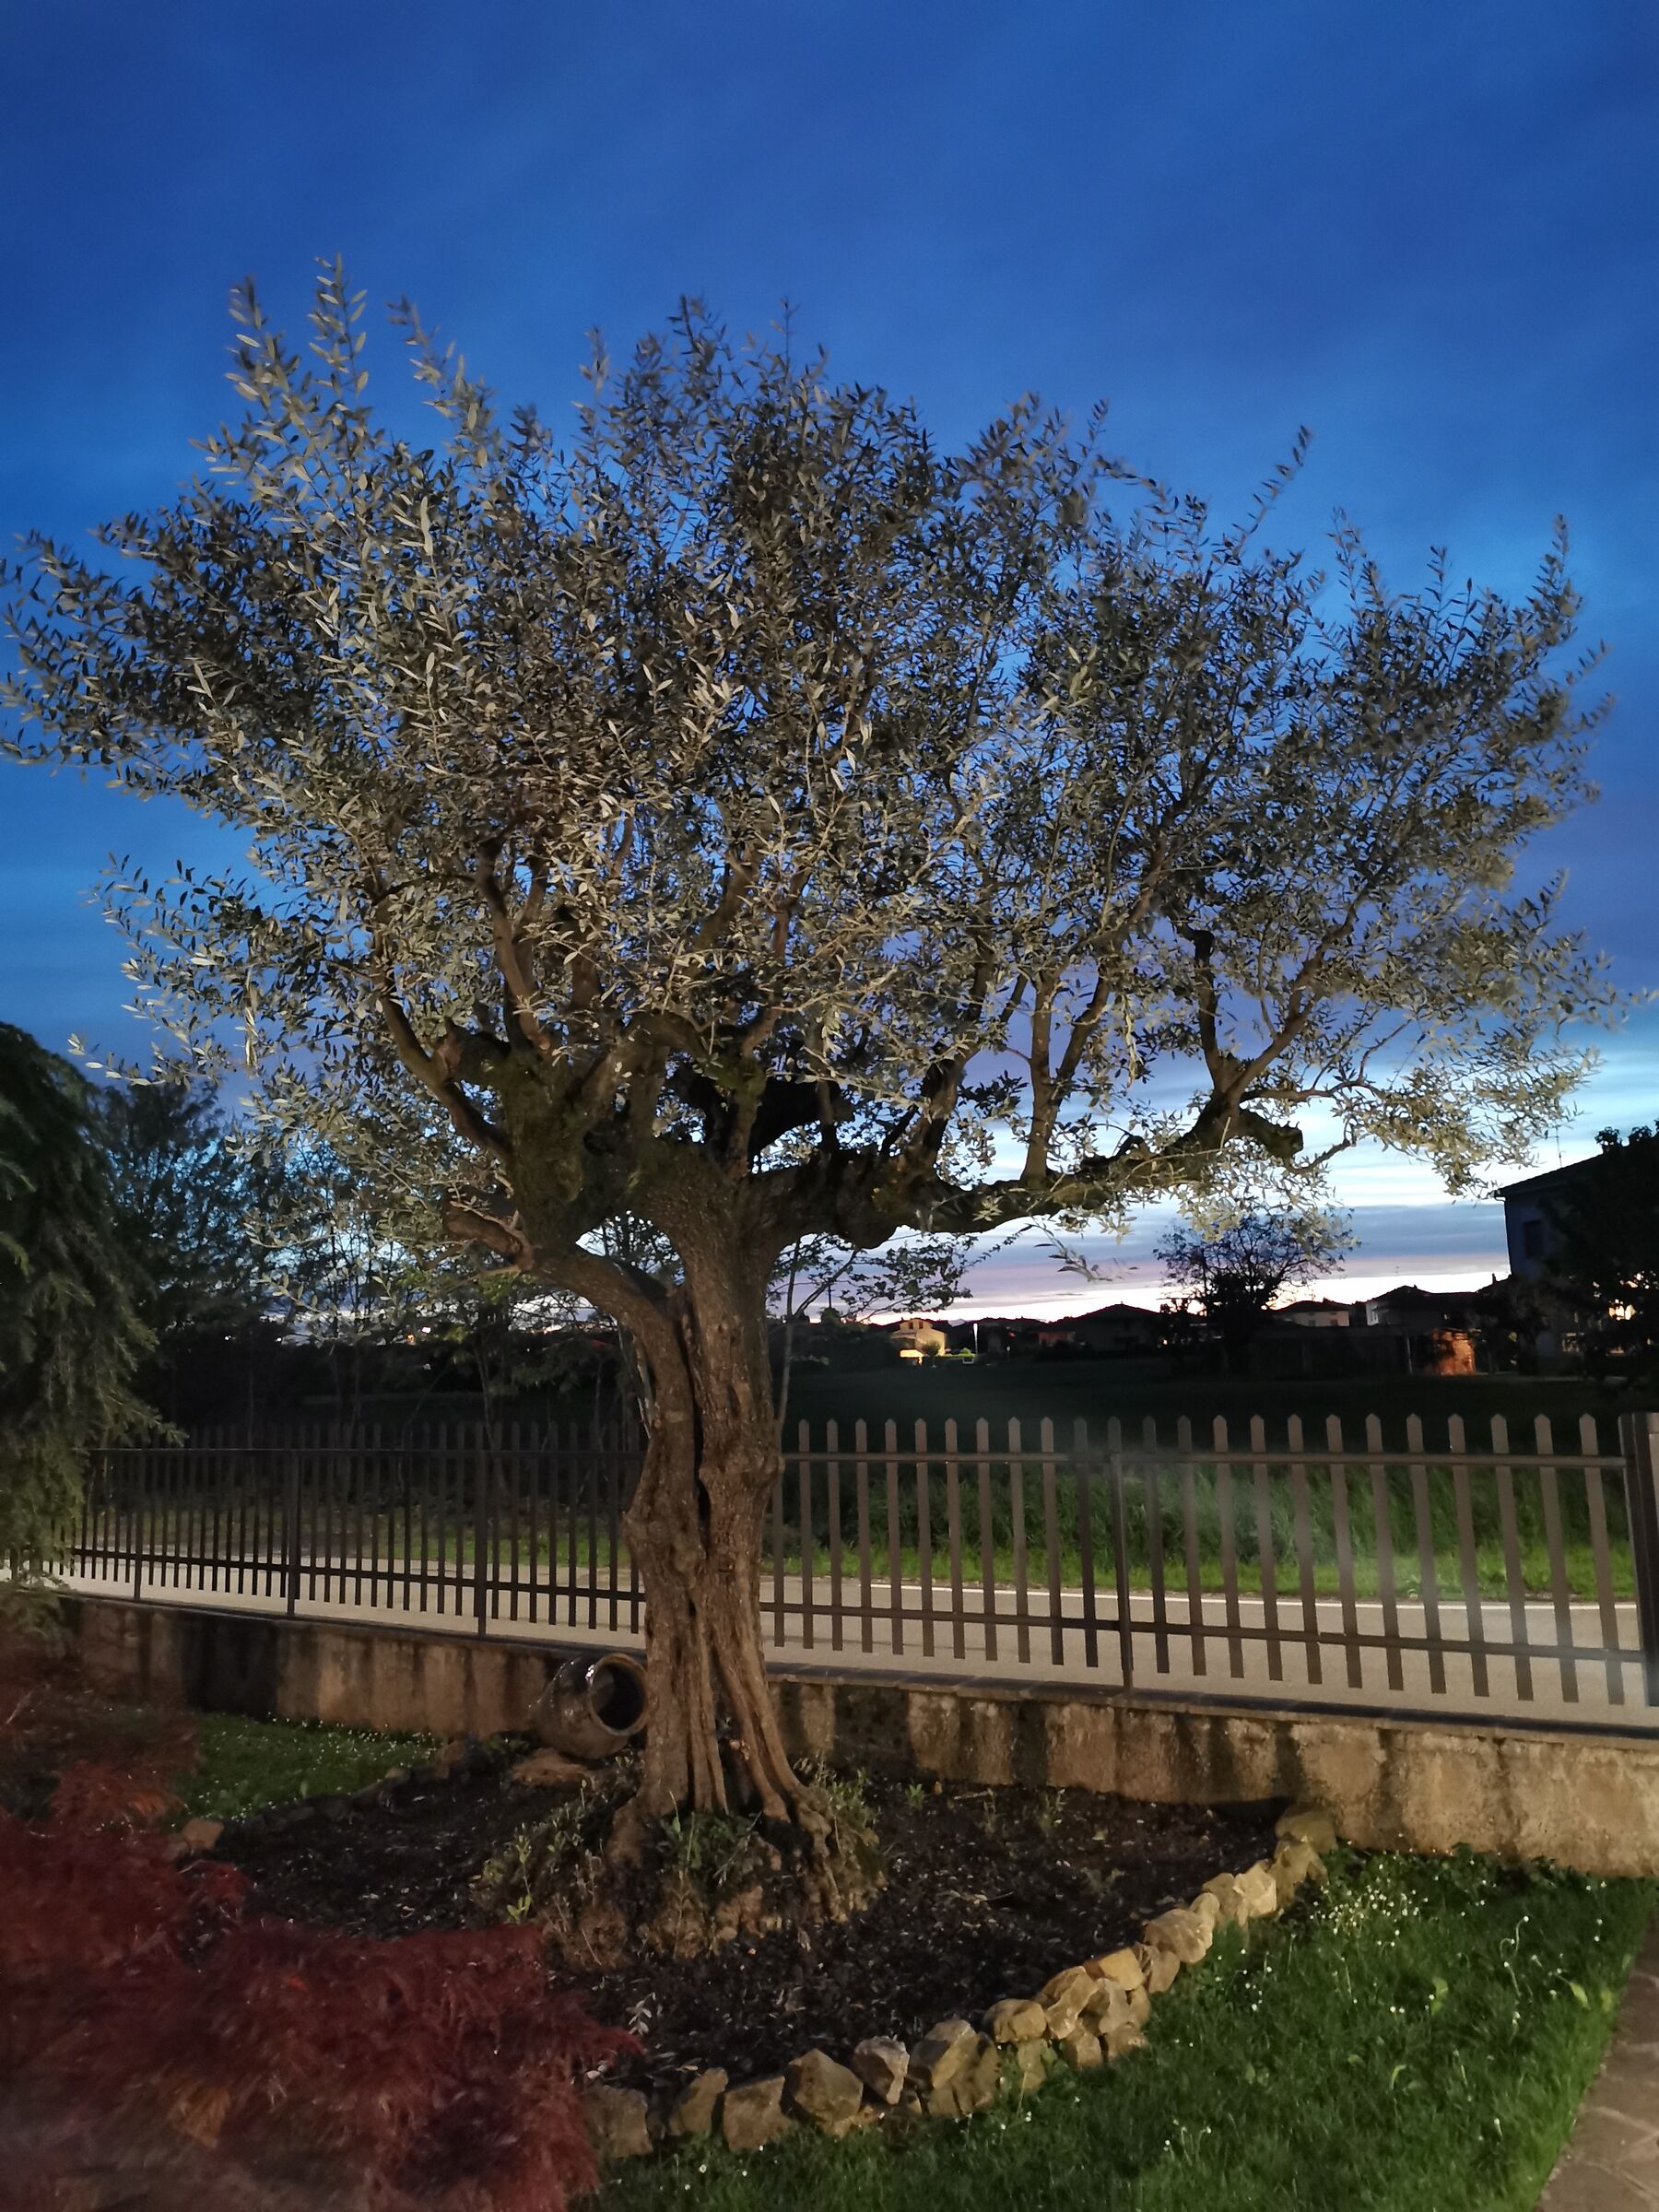 The olive Tree of the house...